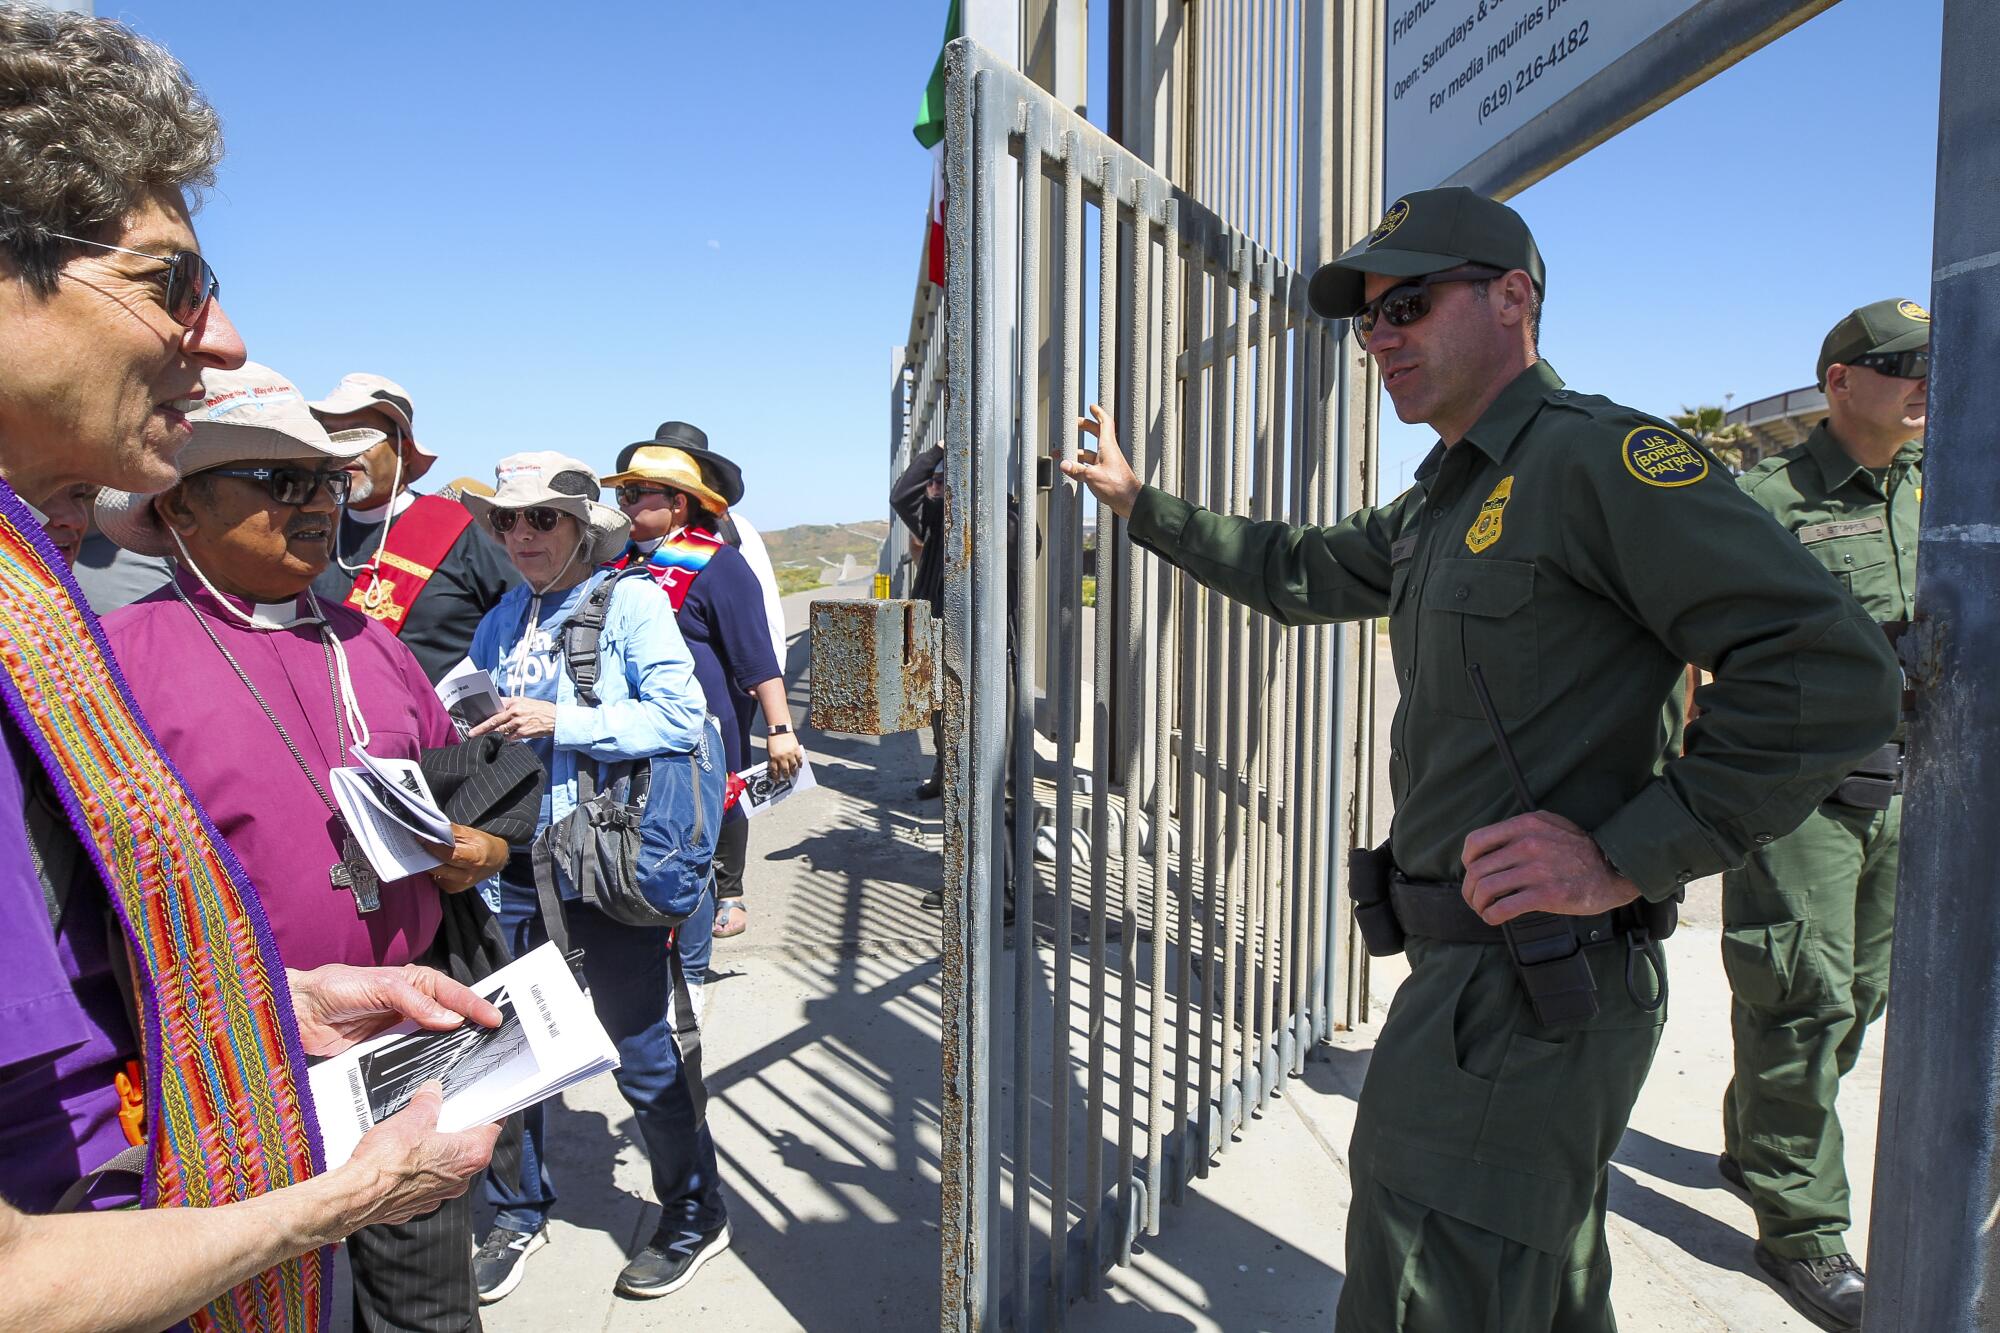 A Border Patrol agent opens a gate in the border fence.